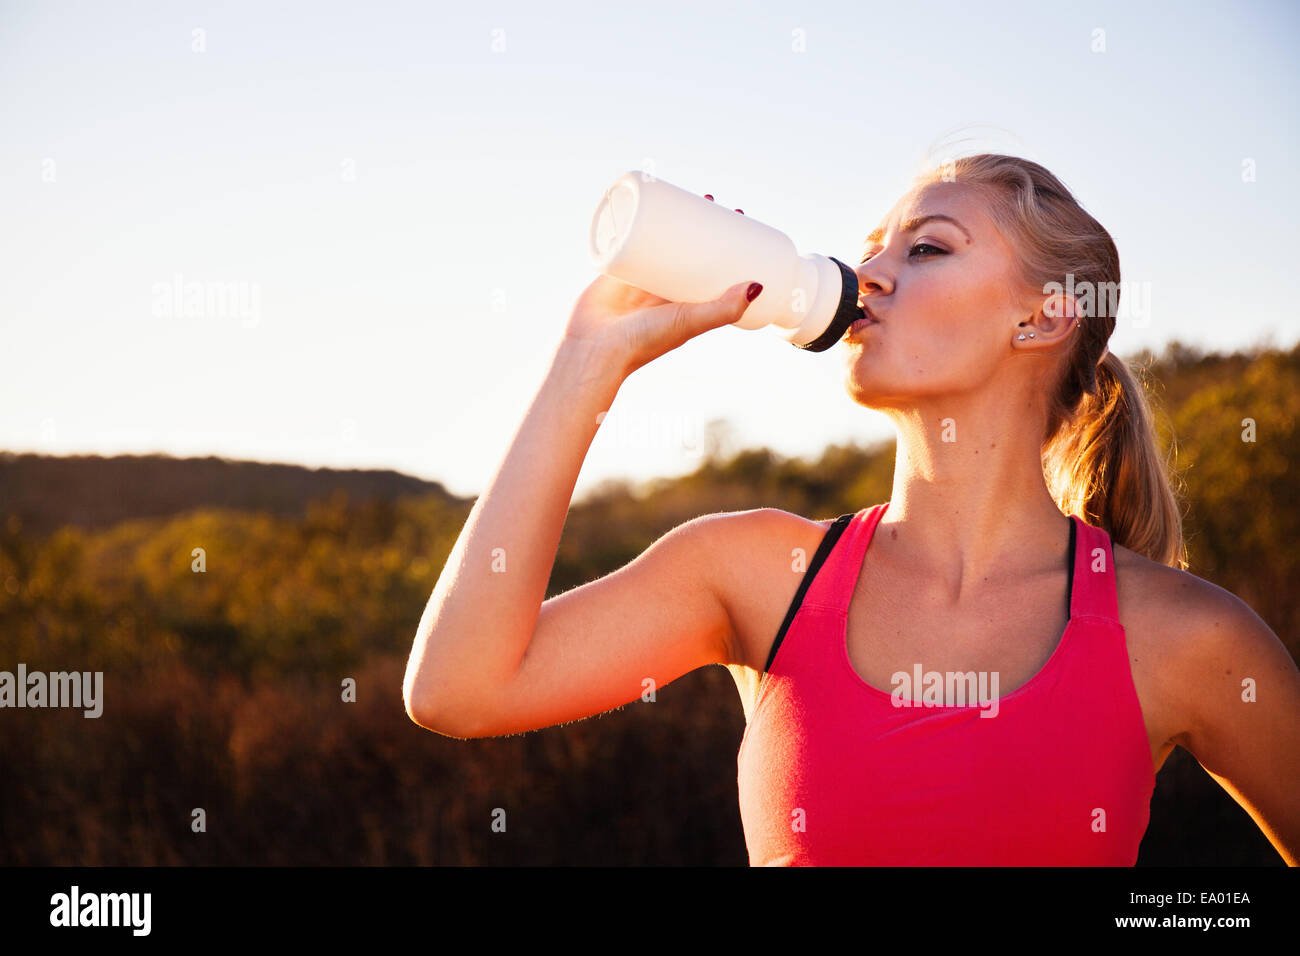 Female jogger drinking from water bottle, Poway, CA, USA Stock Photo